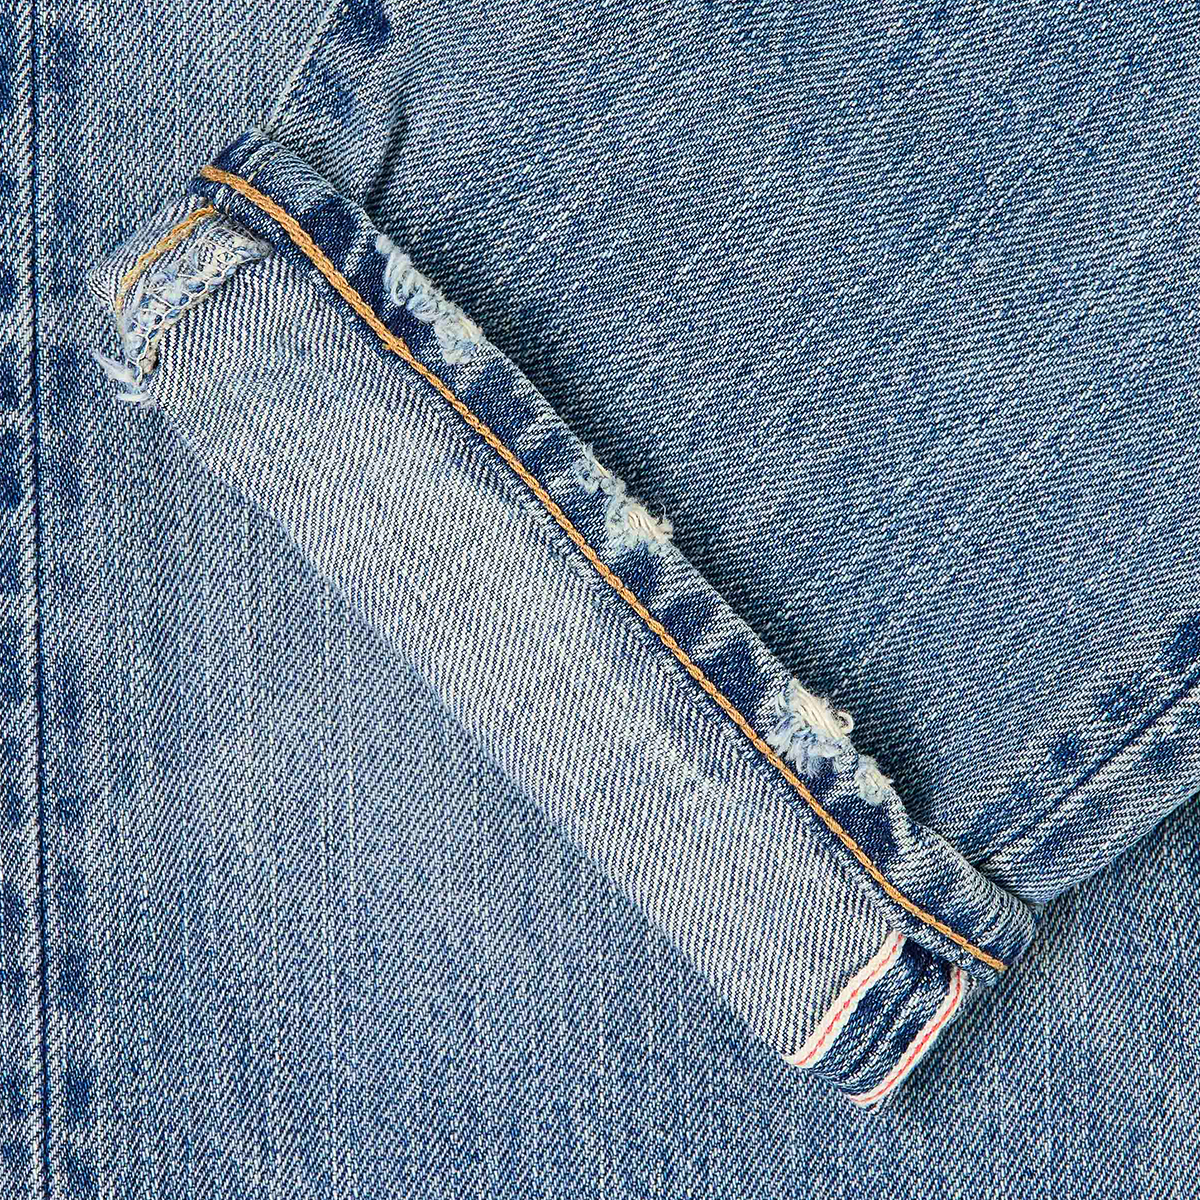 Regular Tapered - Made In Japan - Kurabo Recycle Red Selvage Denim 14oz - Light Used